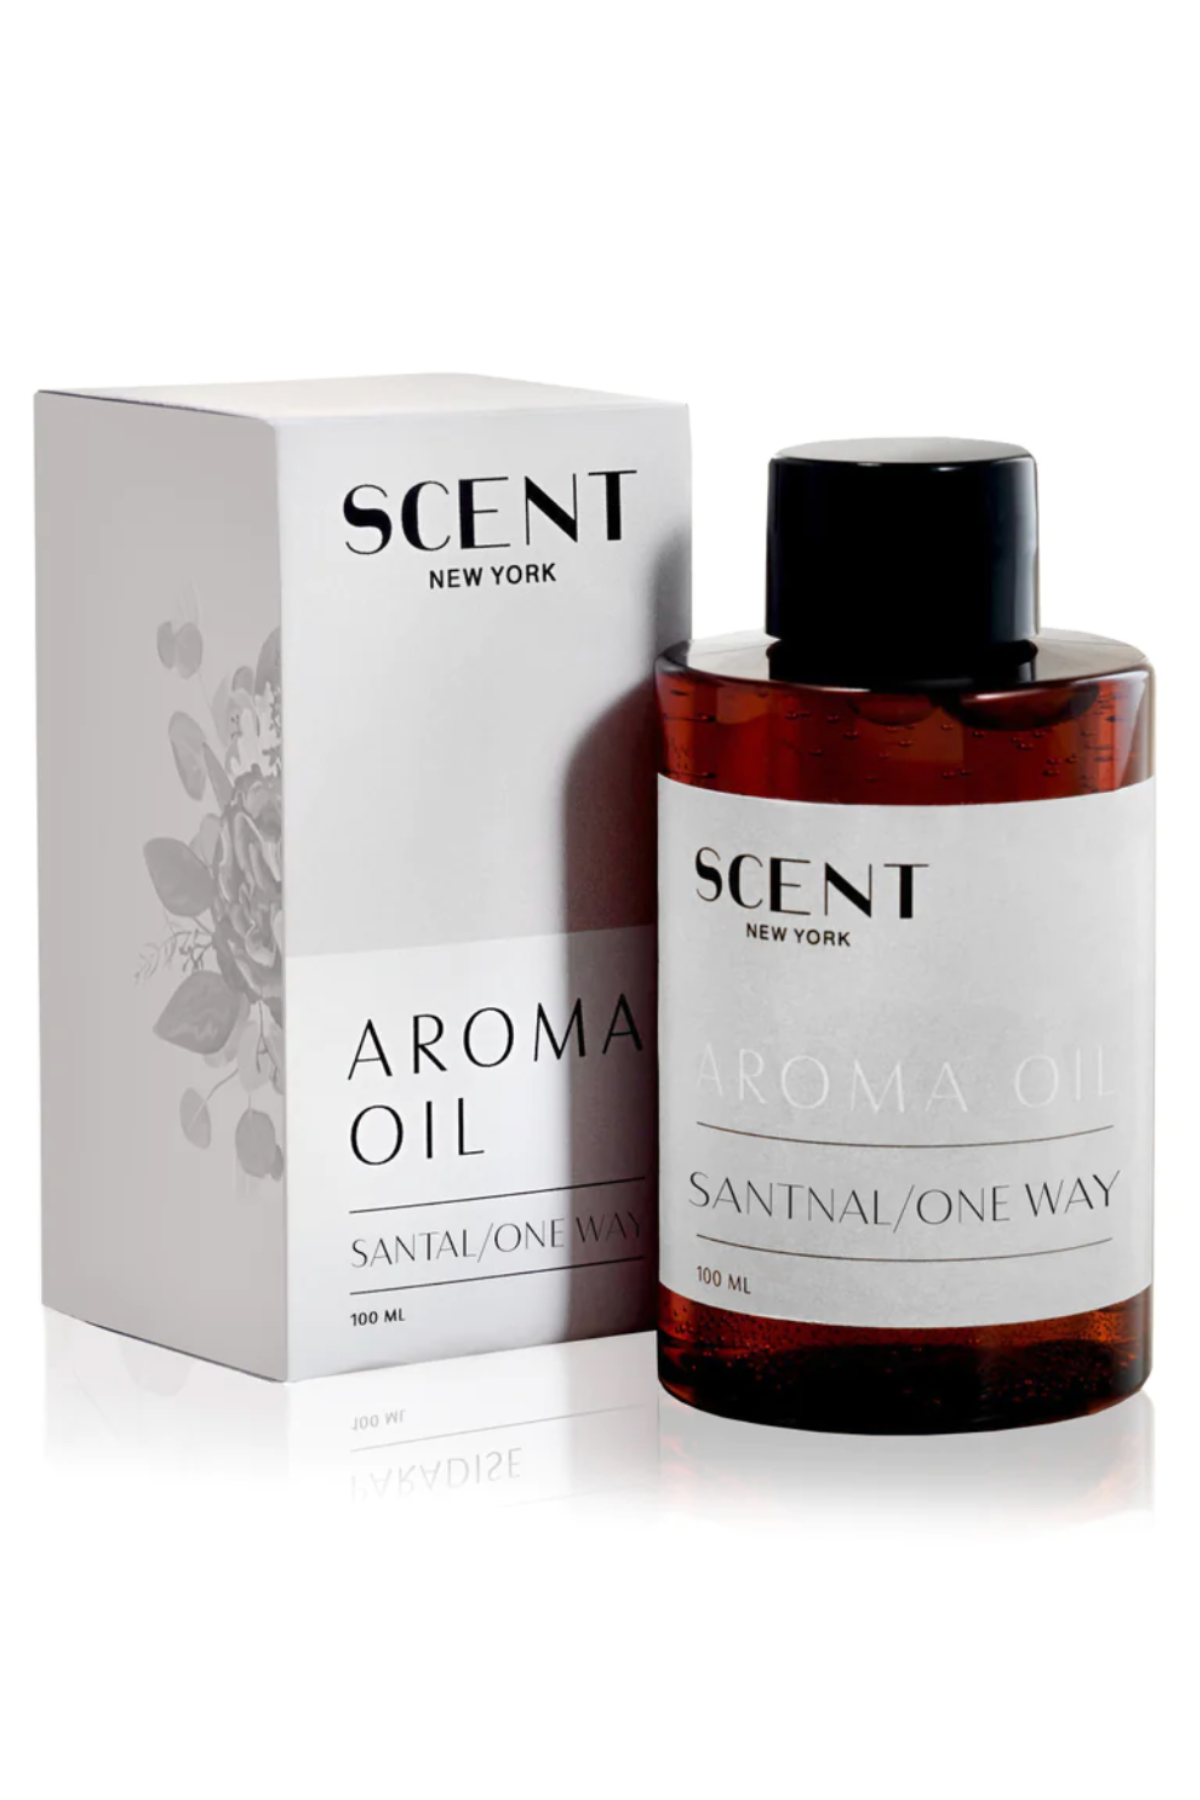 SCENT NEW YORK: 1 HOTEL SANTAL/ONE WAY AROMA OIL